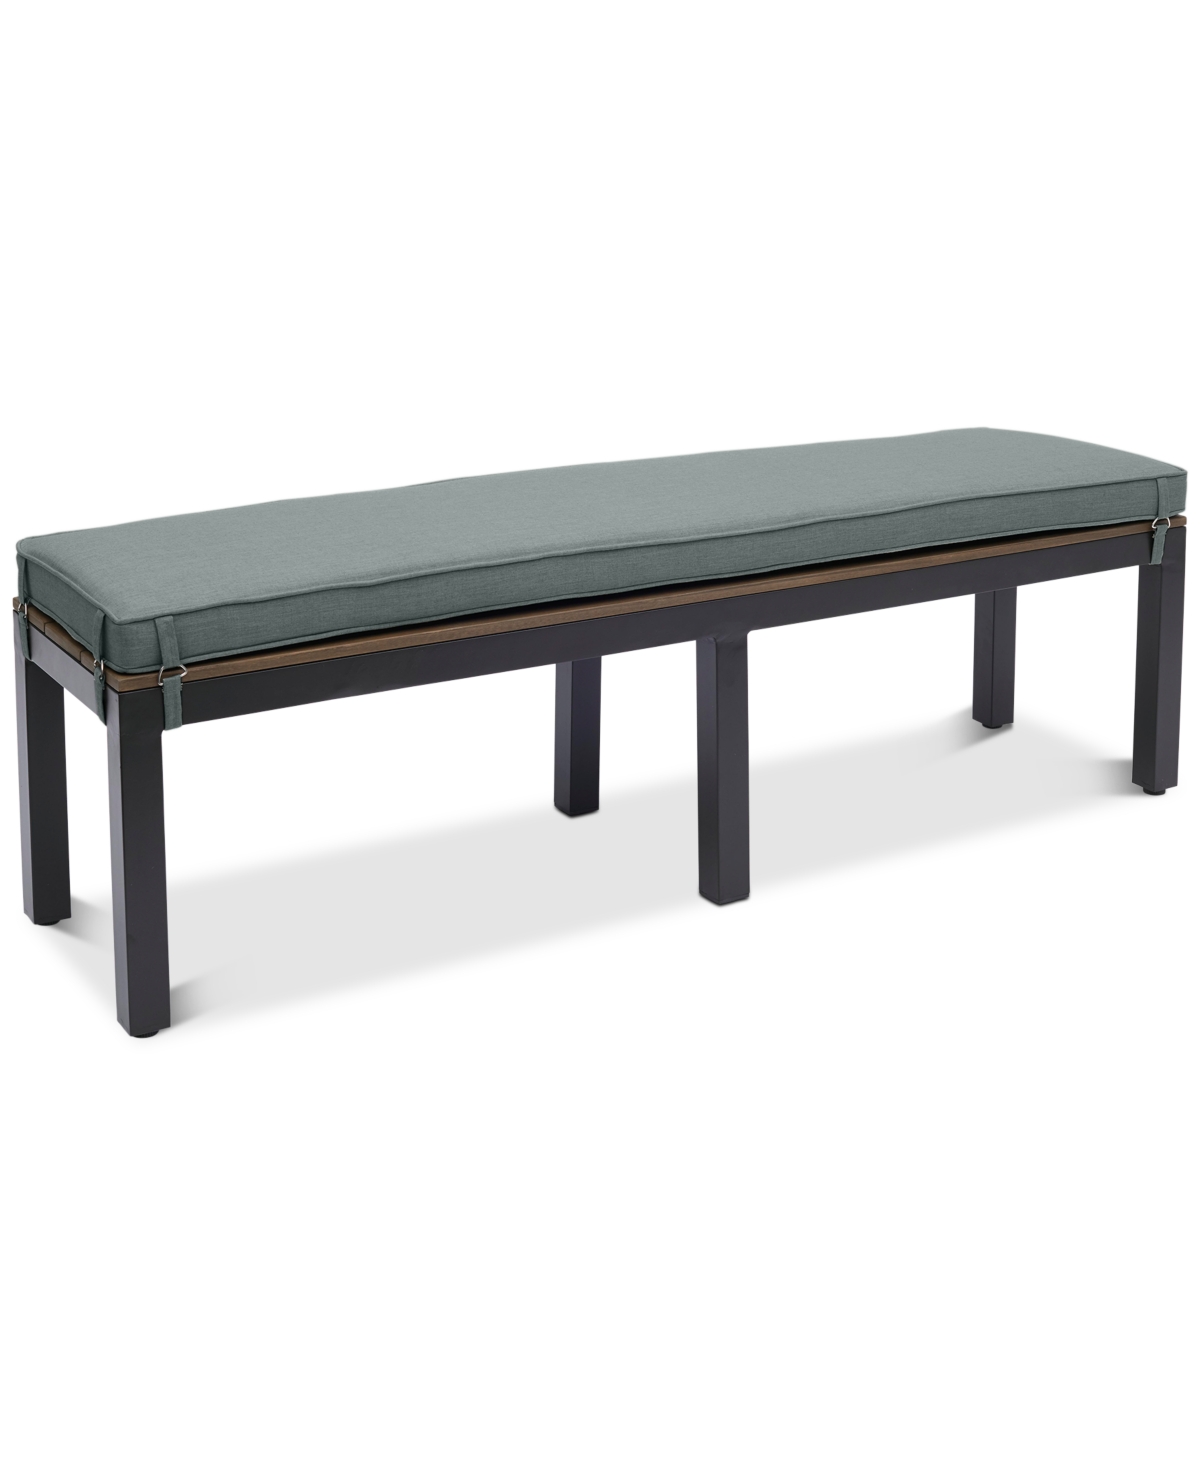 Stockholm Outdoor Bench with Outdoor Cushion, Created for Macys